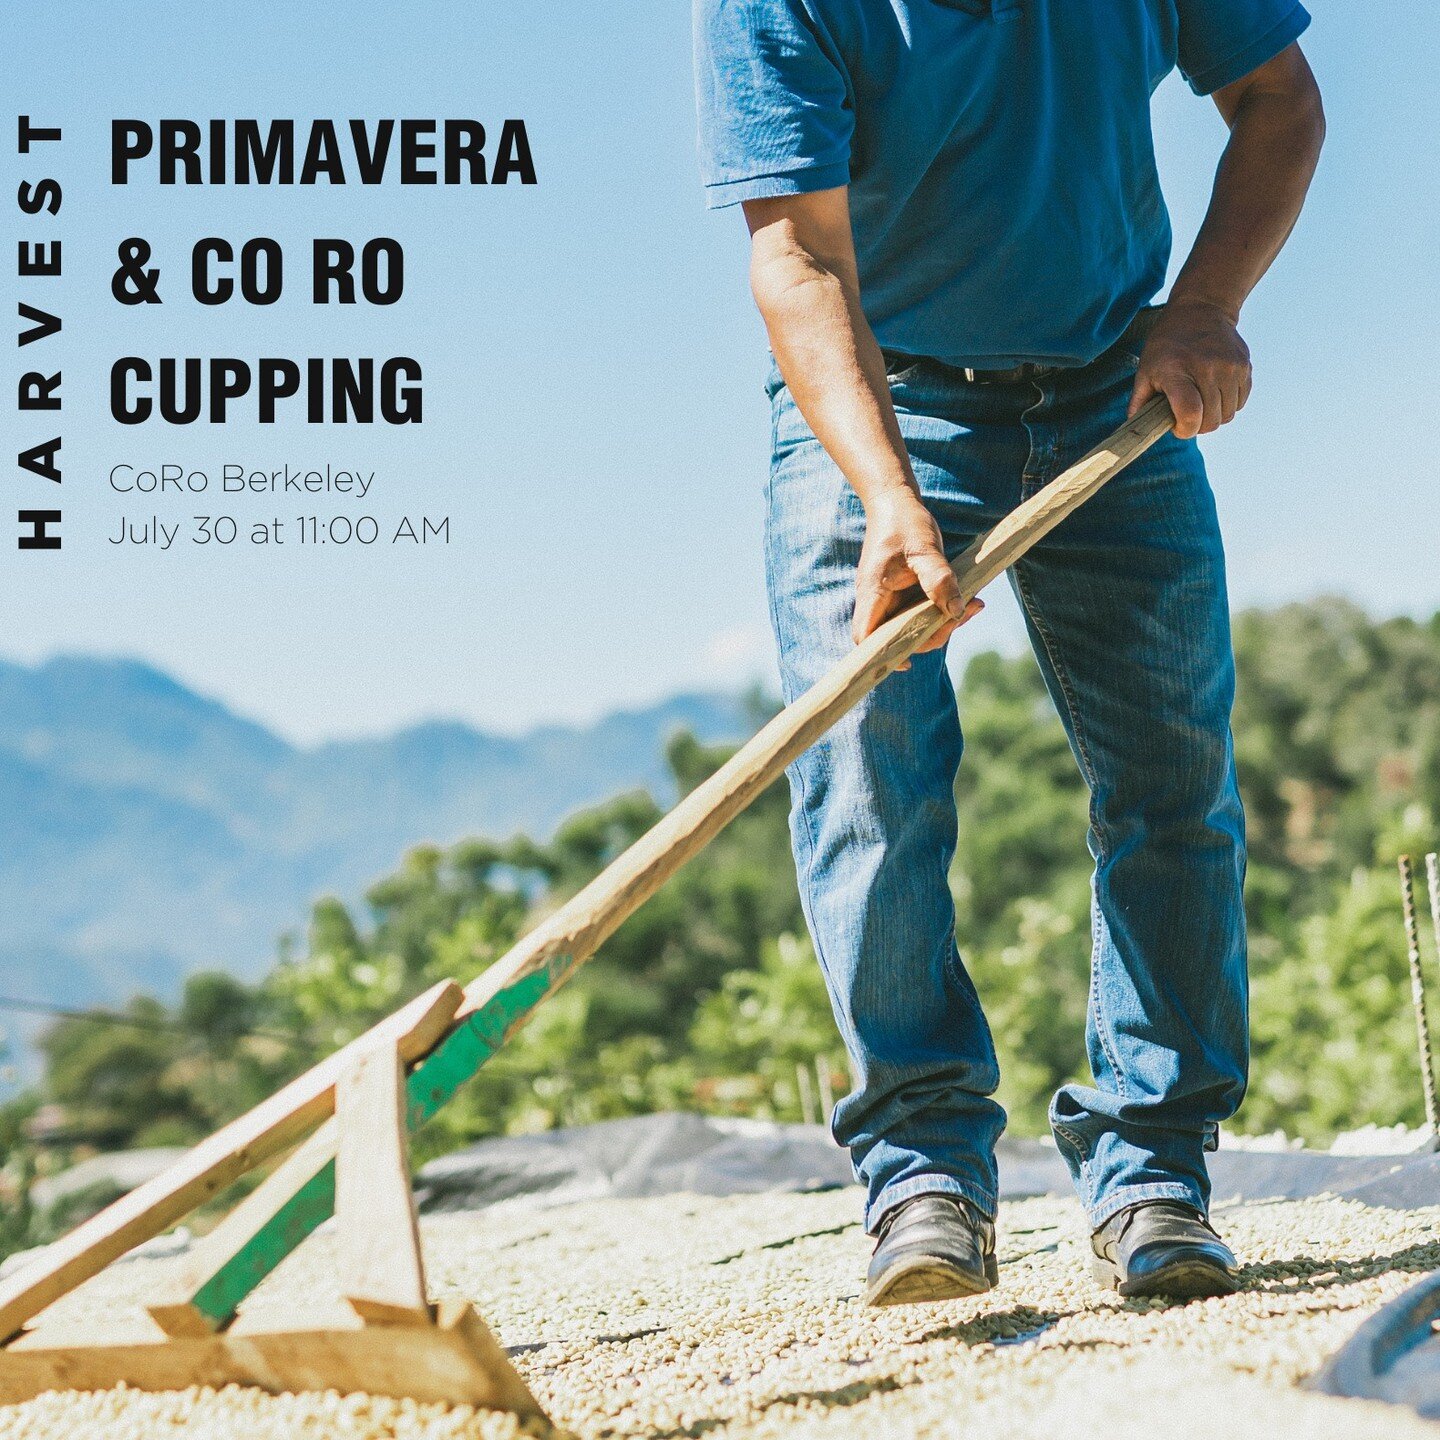 CoRo is super excited to have @primavera.coffee come by for a cupping on July 30th at 11am!

A little about Primavera:

We&rsquo;re a coffee importer specializing in high-quality lots and micro lots from Guatemala, with a sales office in Berkeley, CA